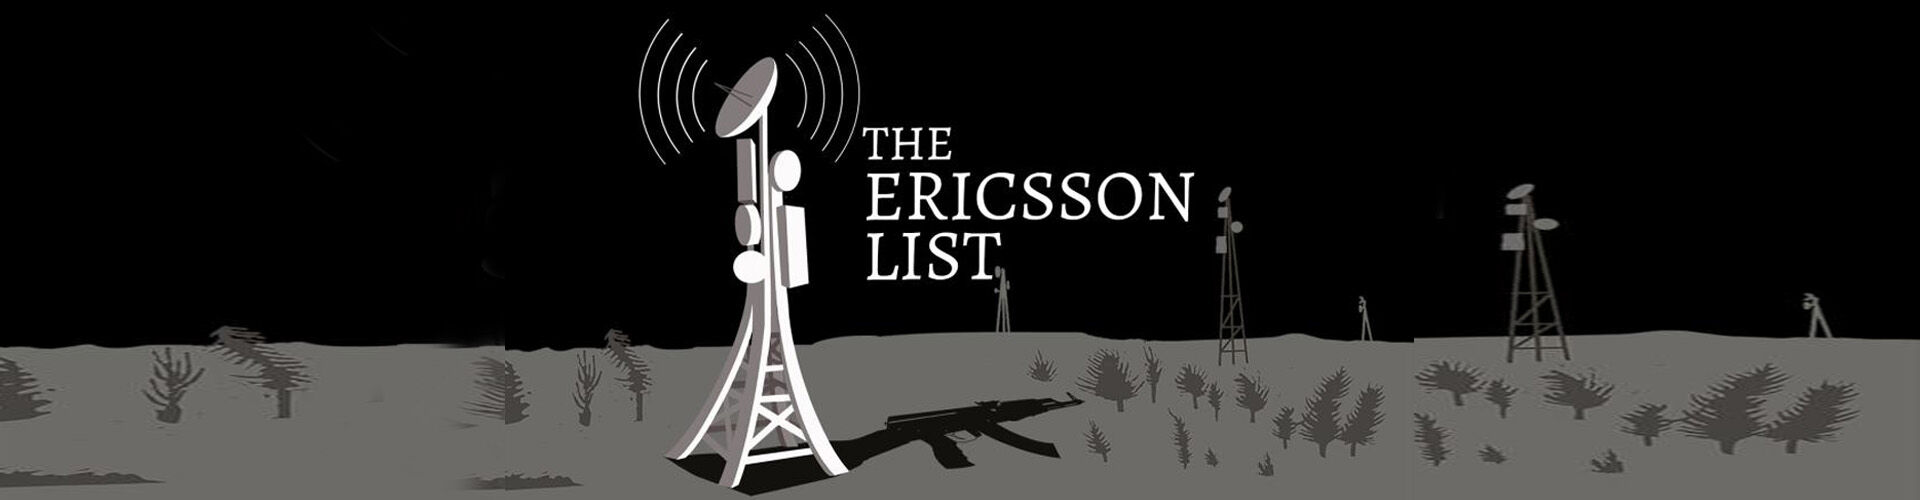 The Ericsson List - Absent Justice